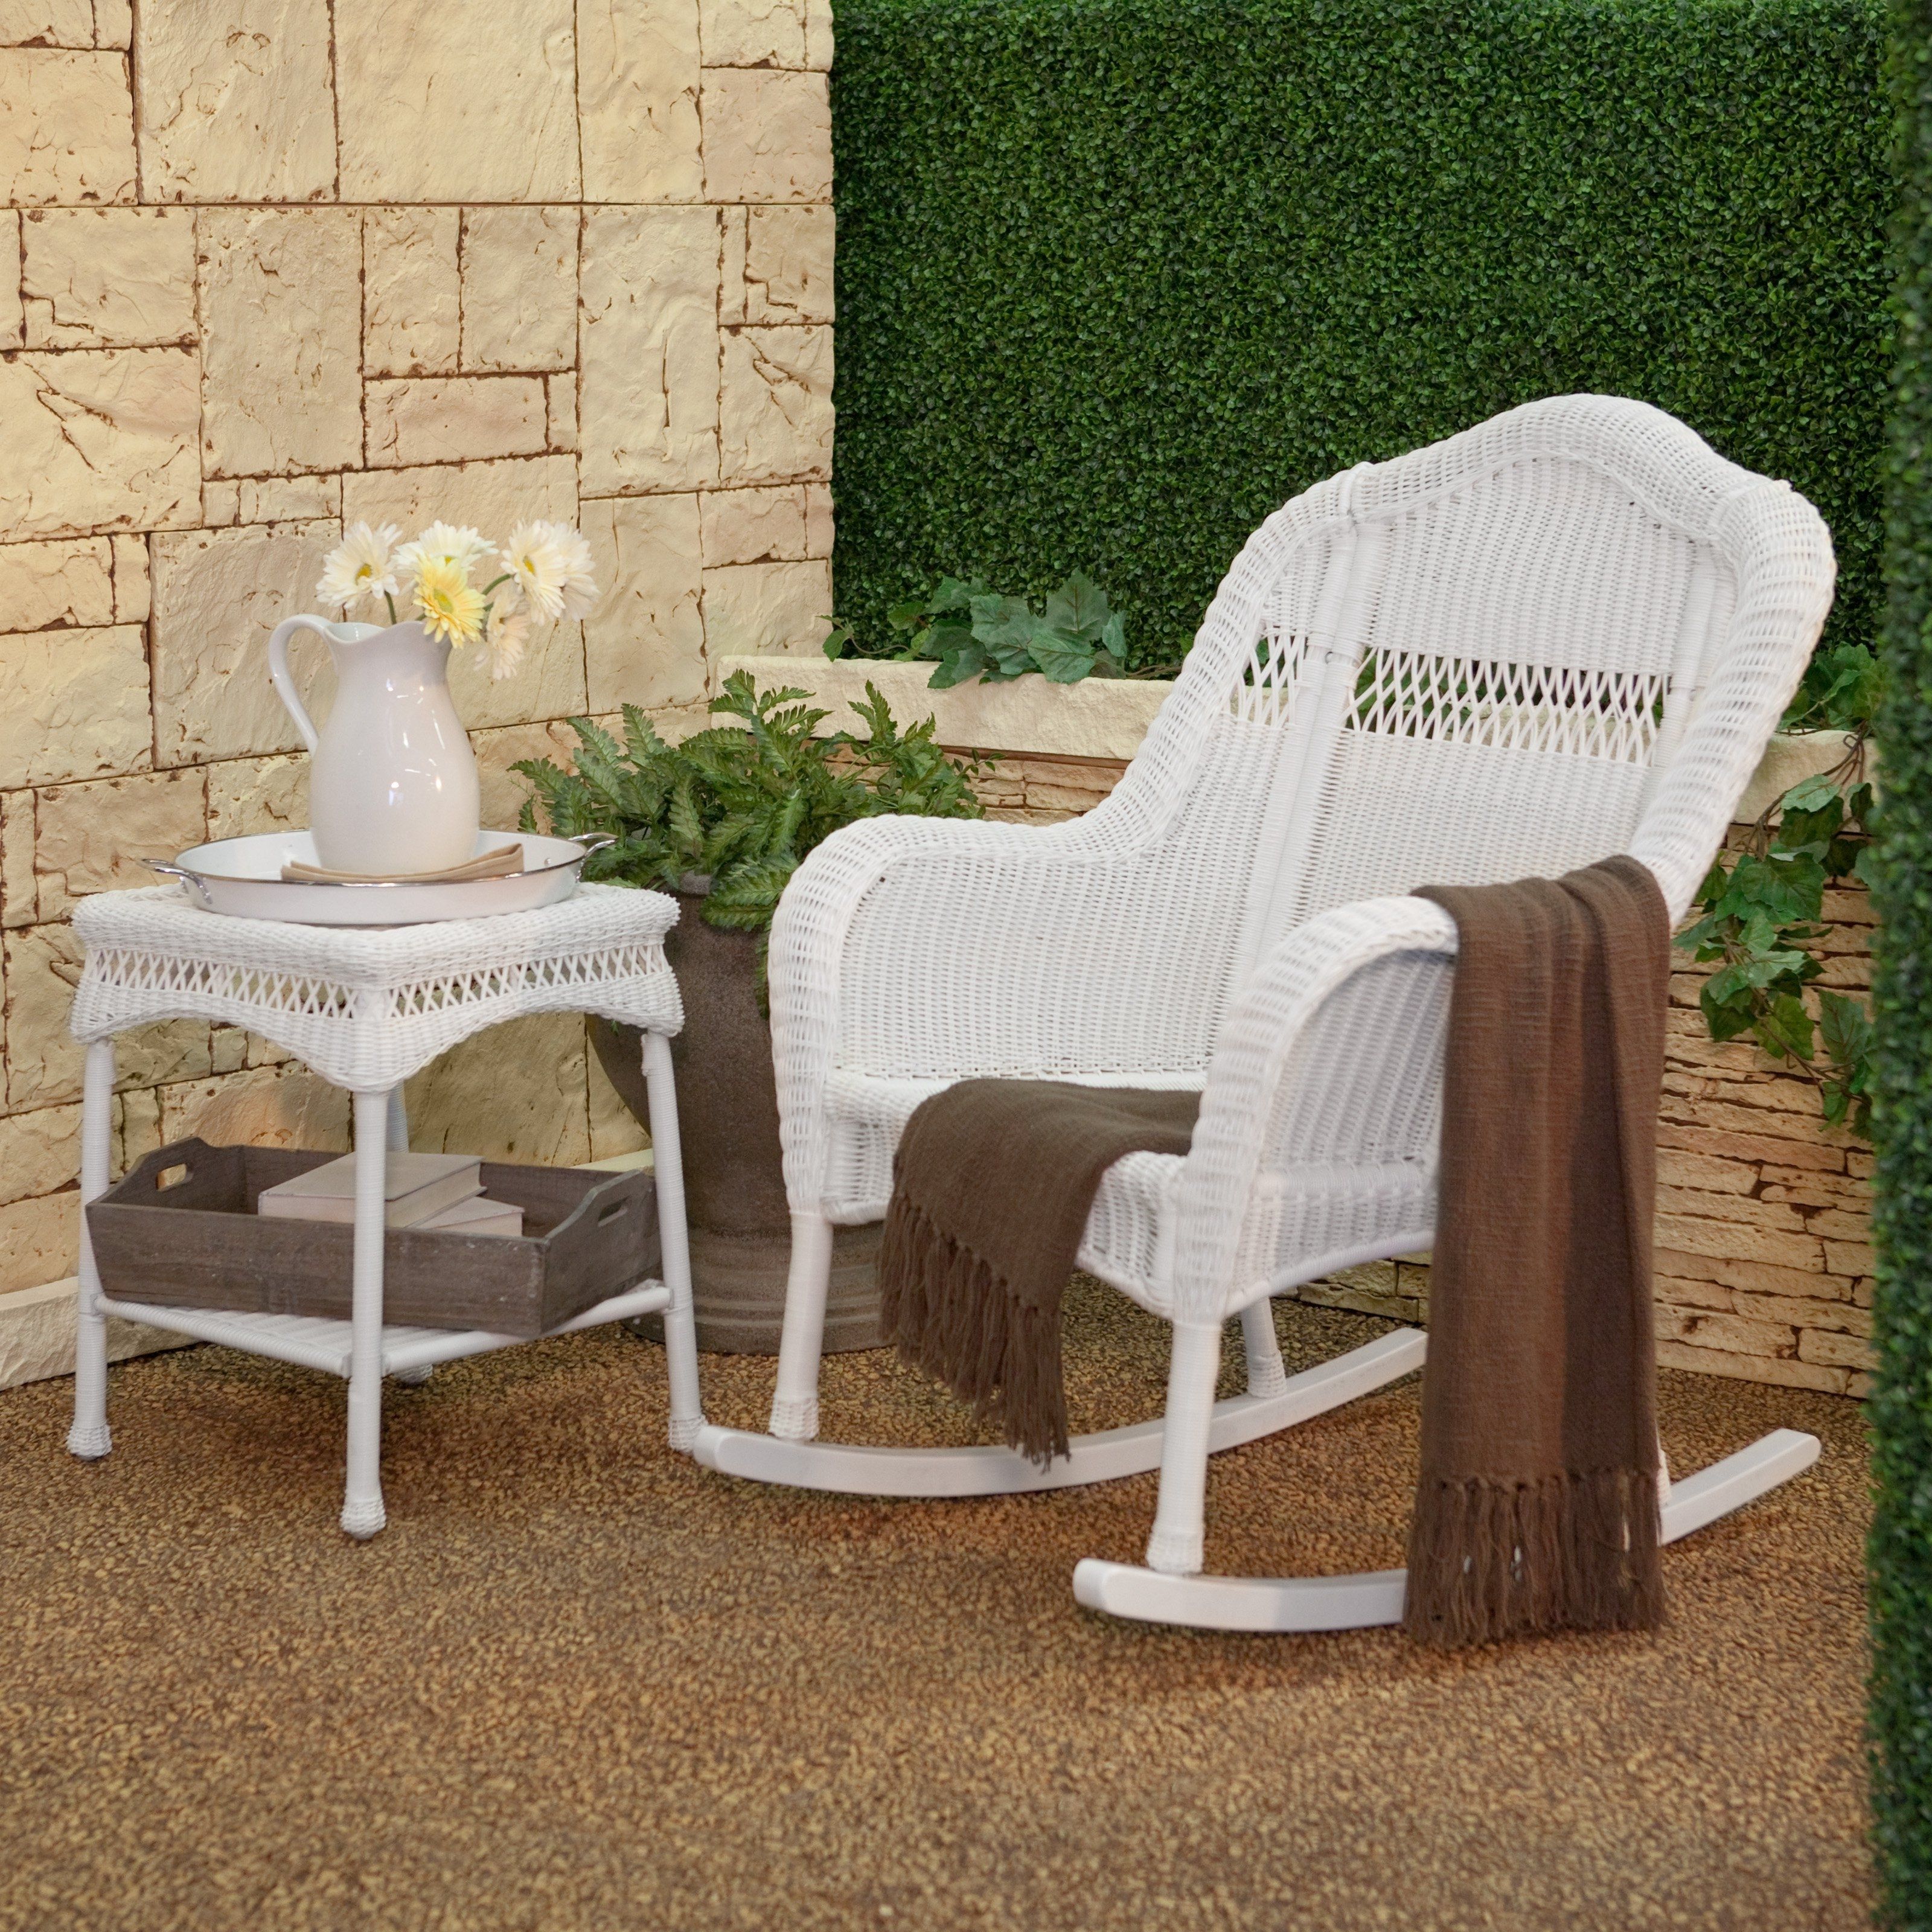 Easylovely Wicker Rocking Chair Stylish Furniture Great About Inside White Wicker Rocking Chair For Nursery (Photo 10 of 15)